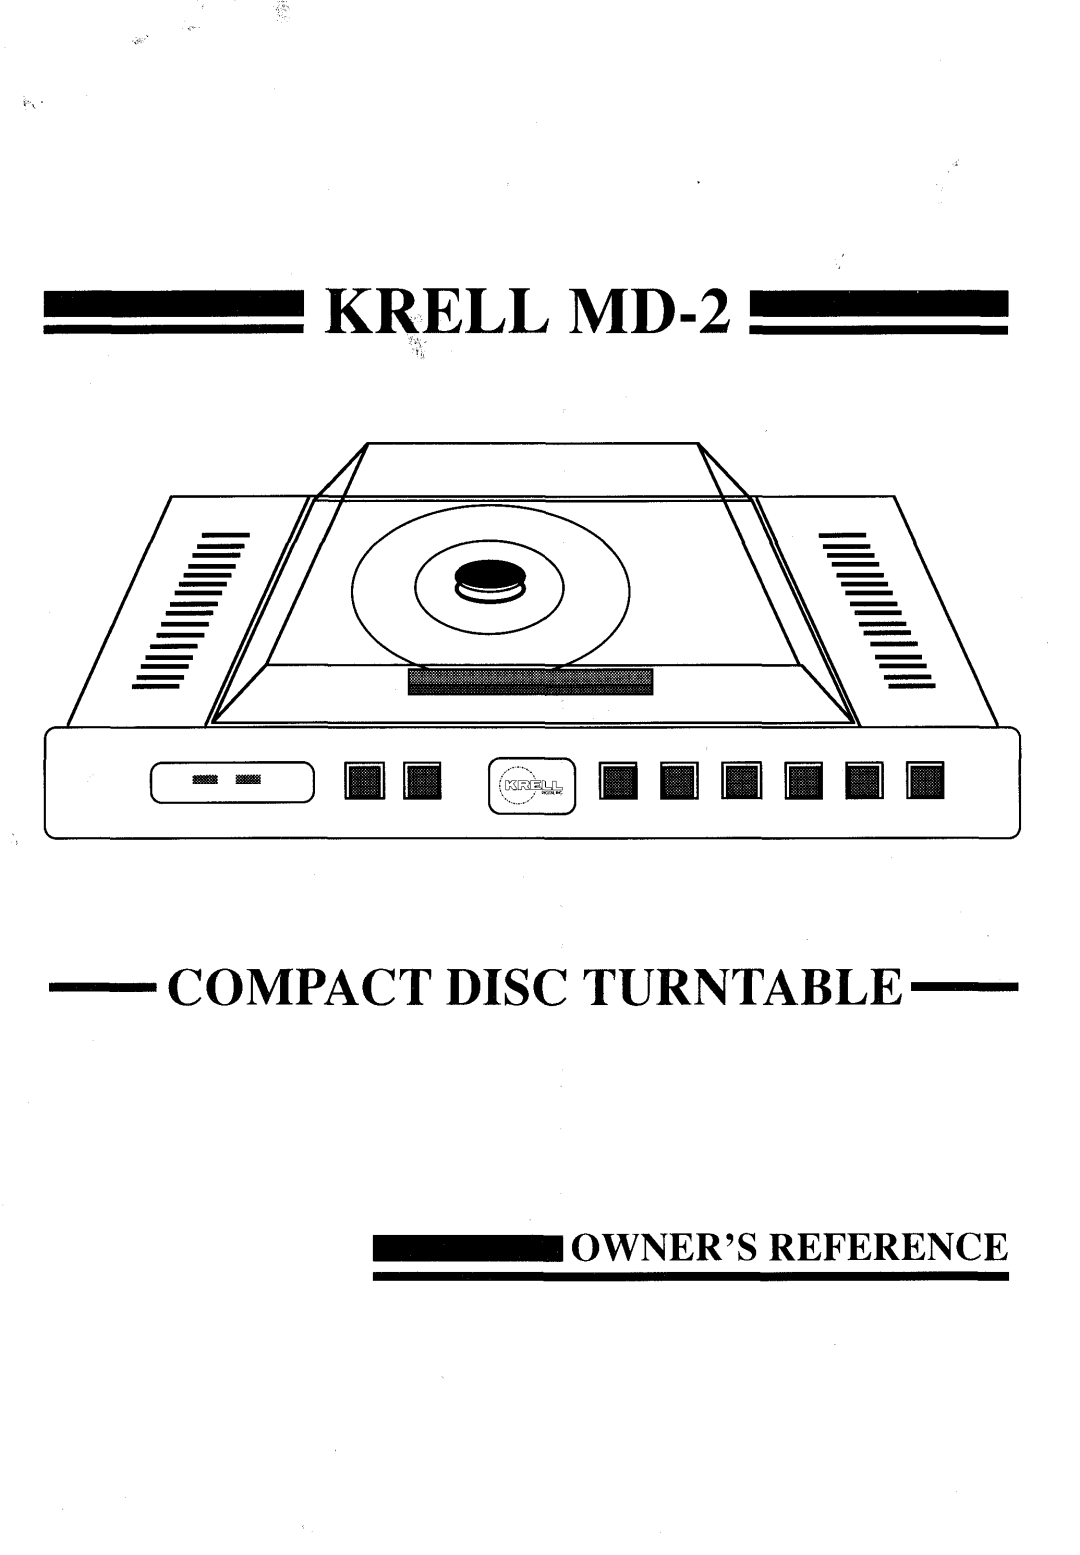 Krell Industries MD2 manual Owners Reference, KRELL MD-2, Compactdisc Turntable, m m m m m m mm m mm mmm mm m m mm mmmm 